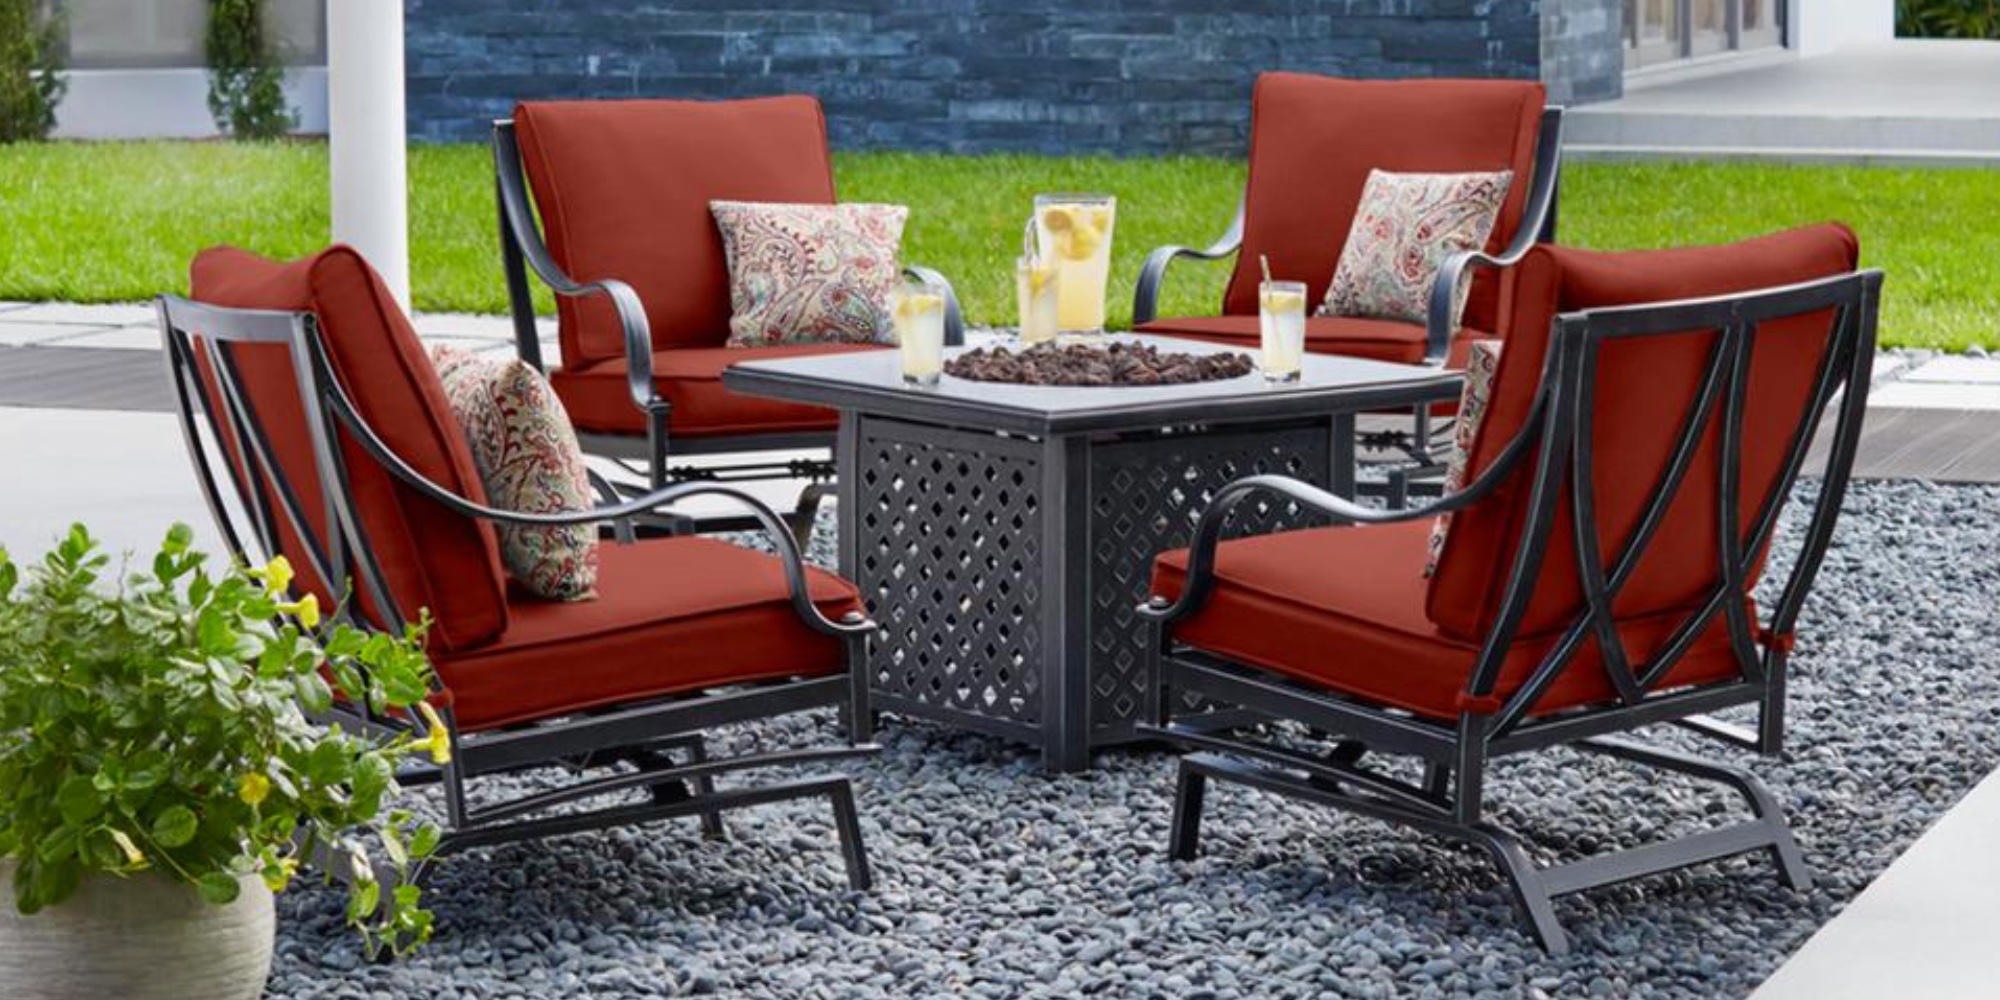 Home Depot Refreshes Your Patio With Up, Home Depot Fire Pit Black Friday